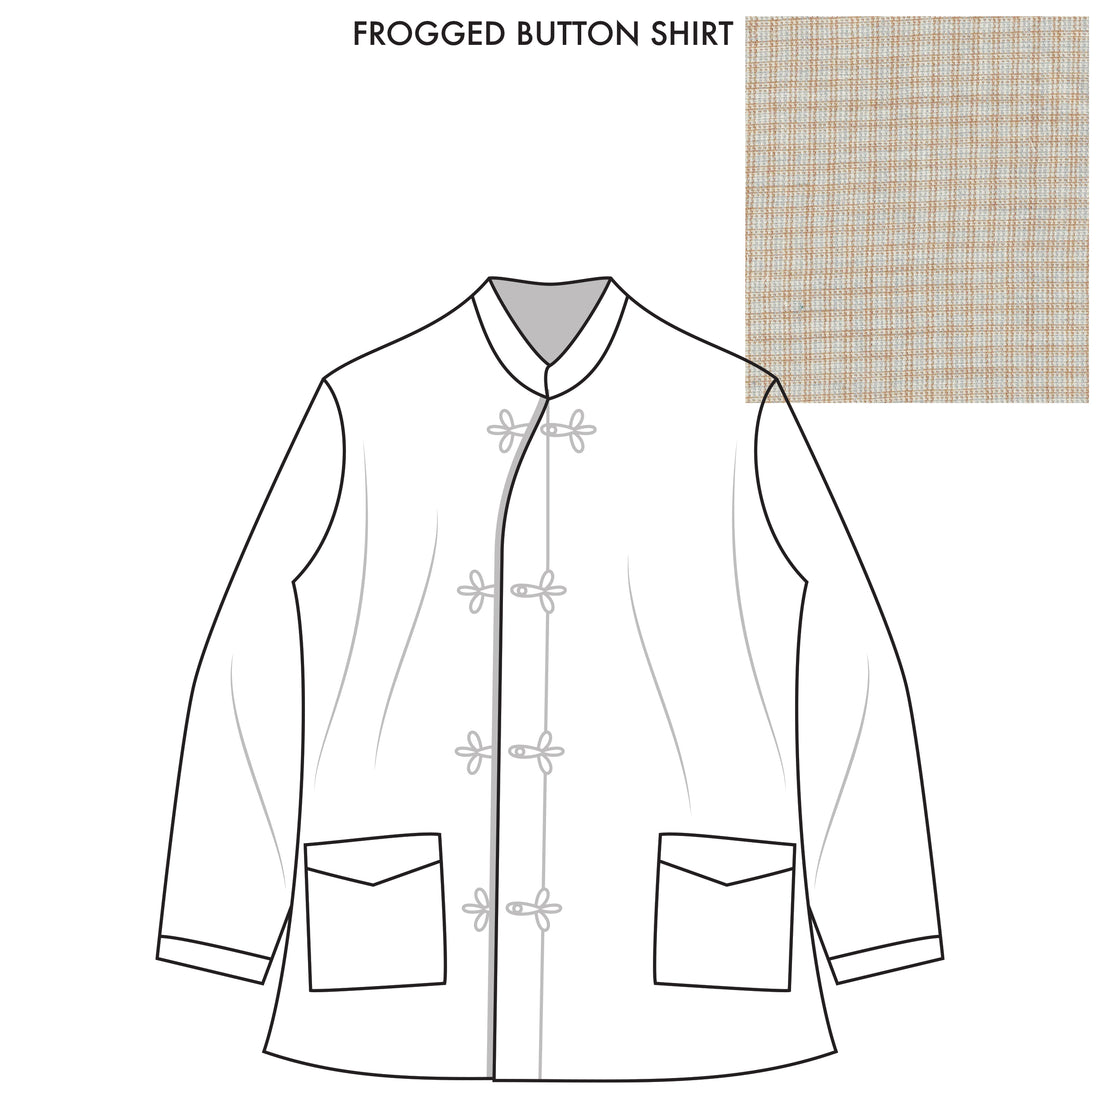 Bryceland’s Frogged Button Shirt Made-to-order Tan/Blue Micro Check